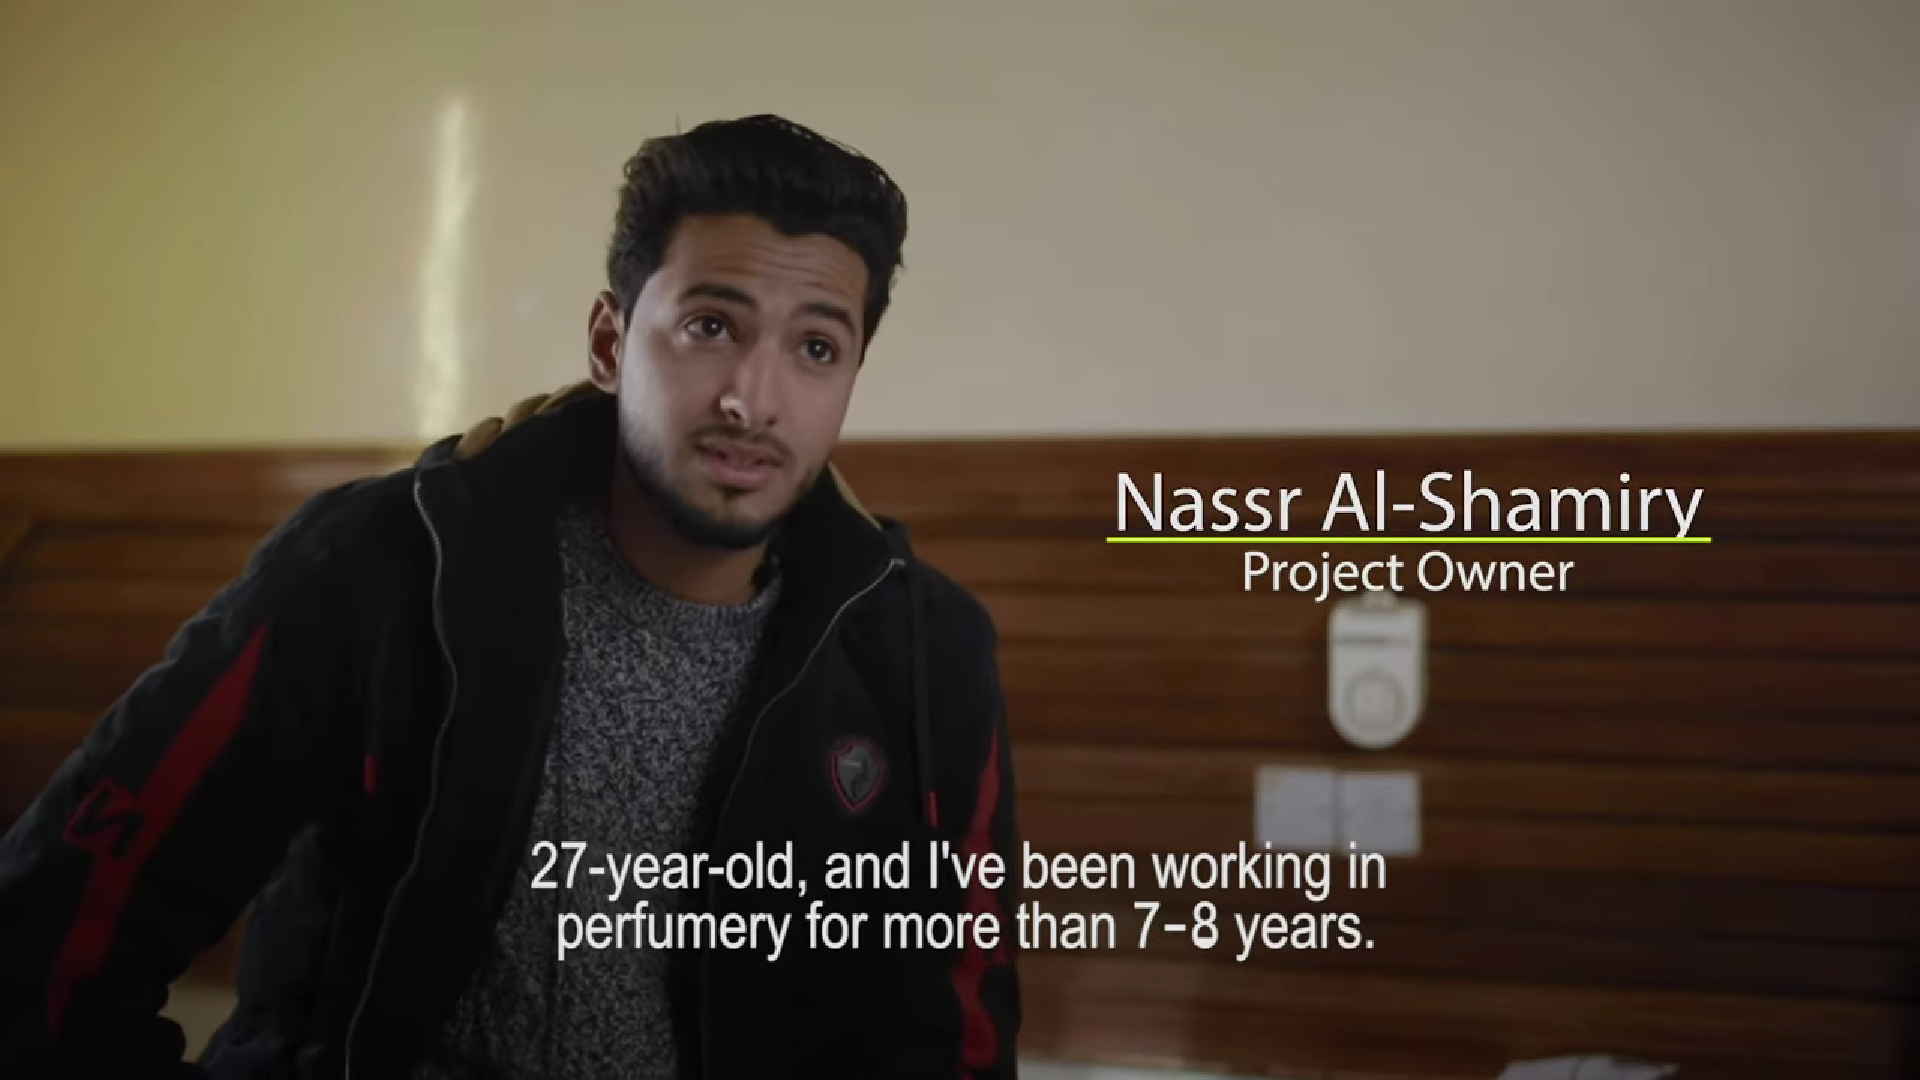 The story of the young Nasr - in which he tells his experience with finance and financial skills